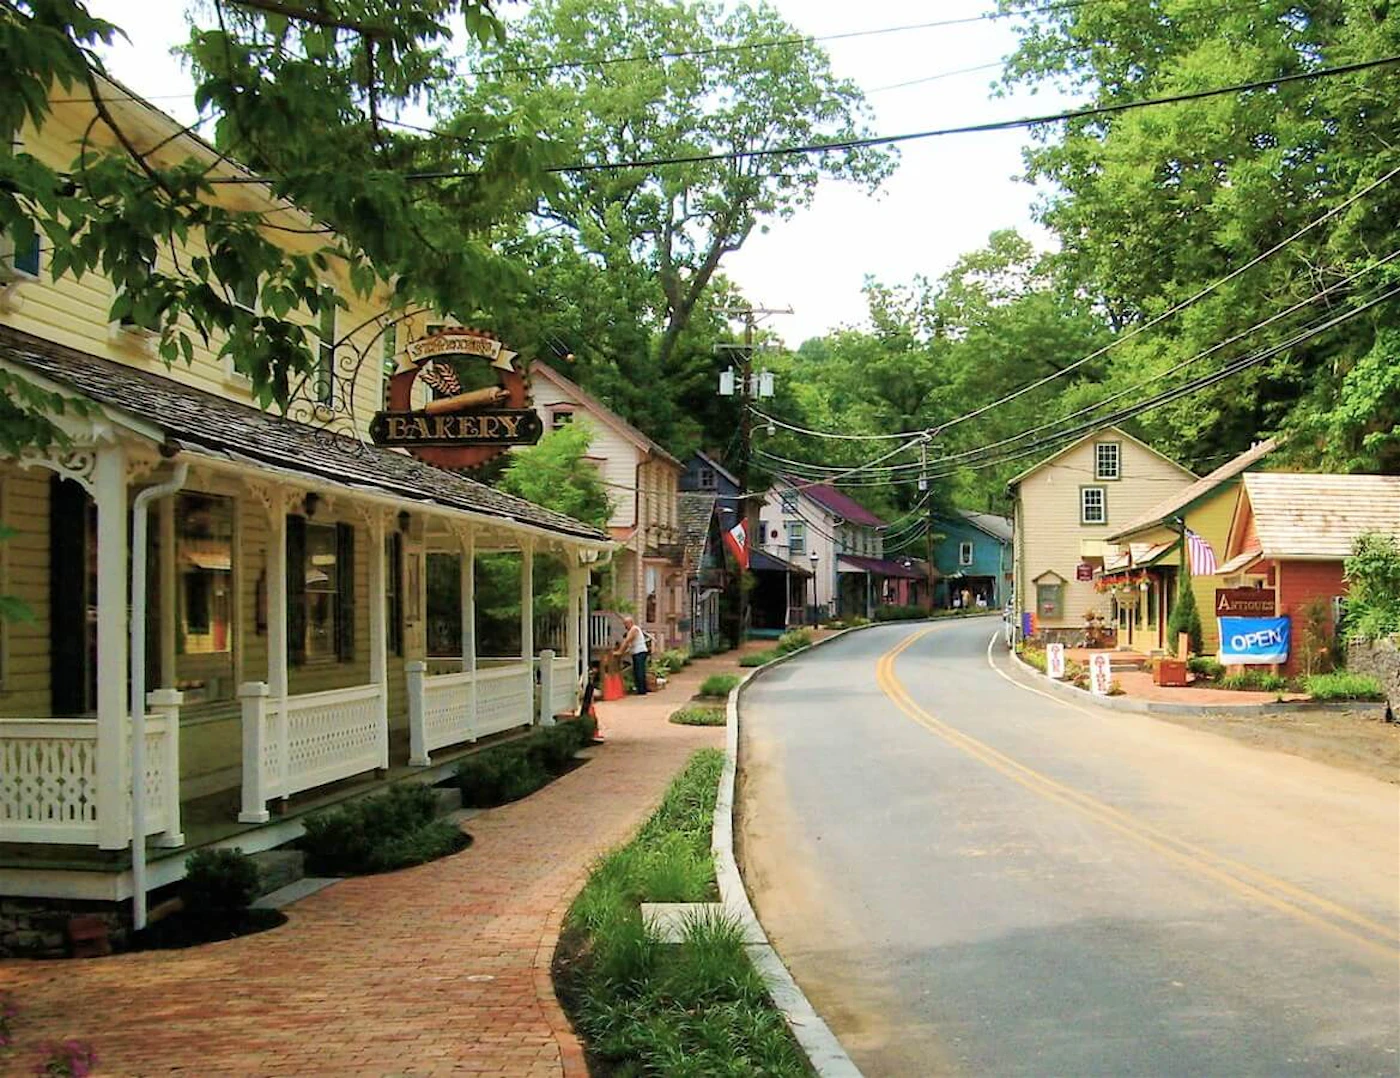 Discover Pennsylvania’s Tiny Treasures: 10 Quaint Small Towns That Pack a Big Punch